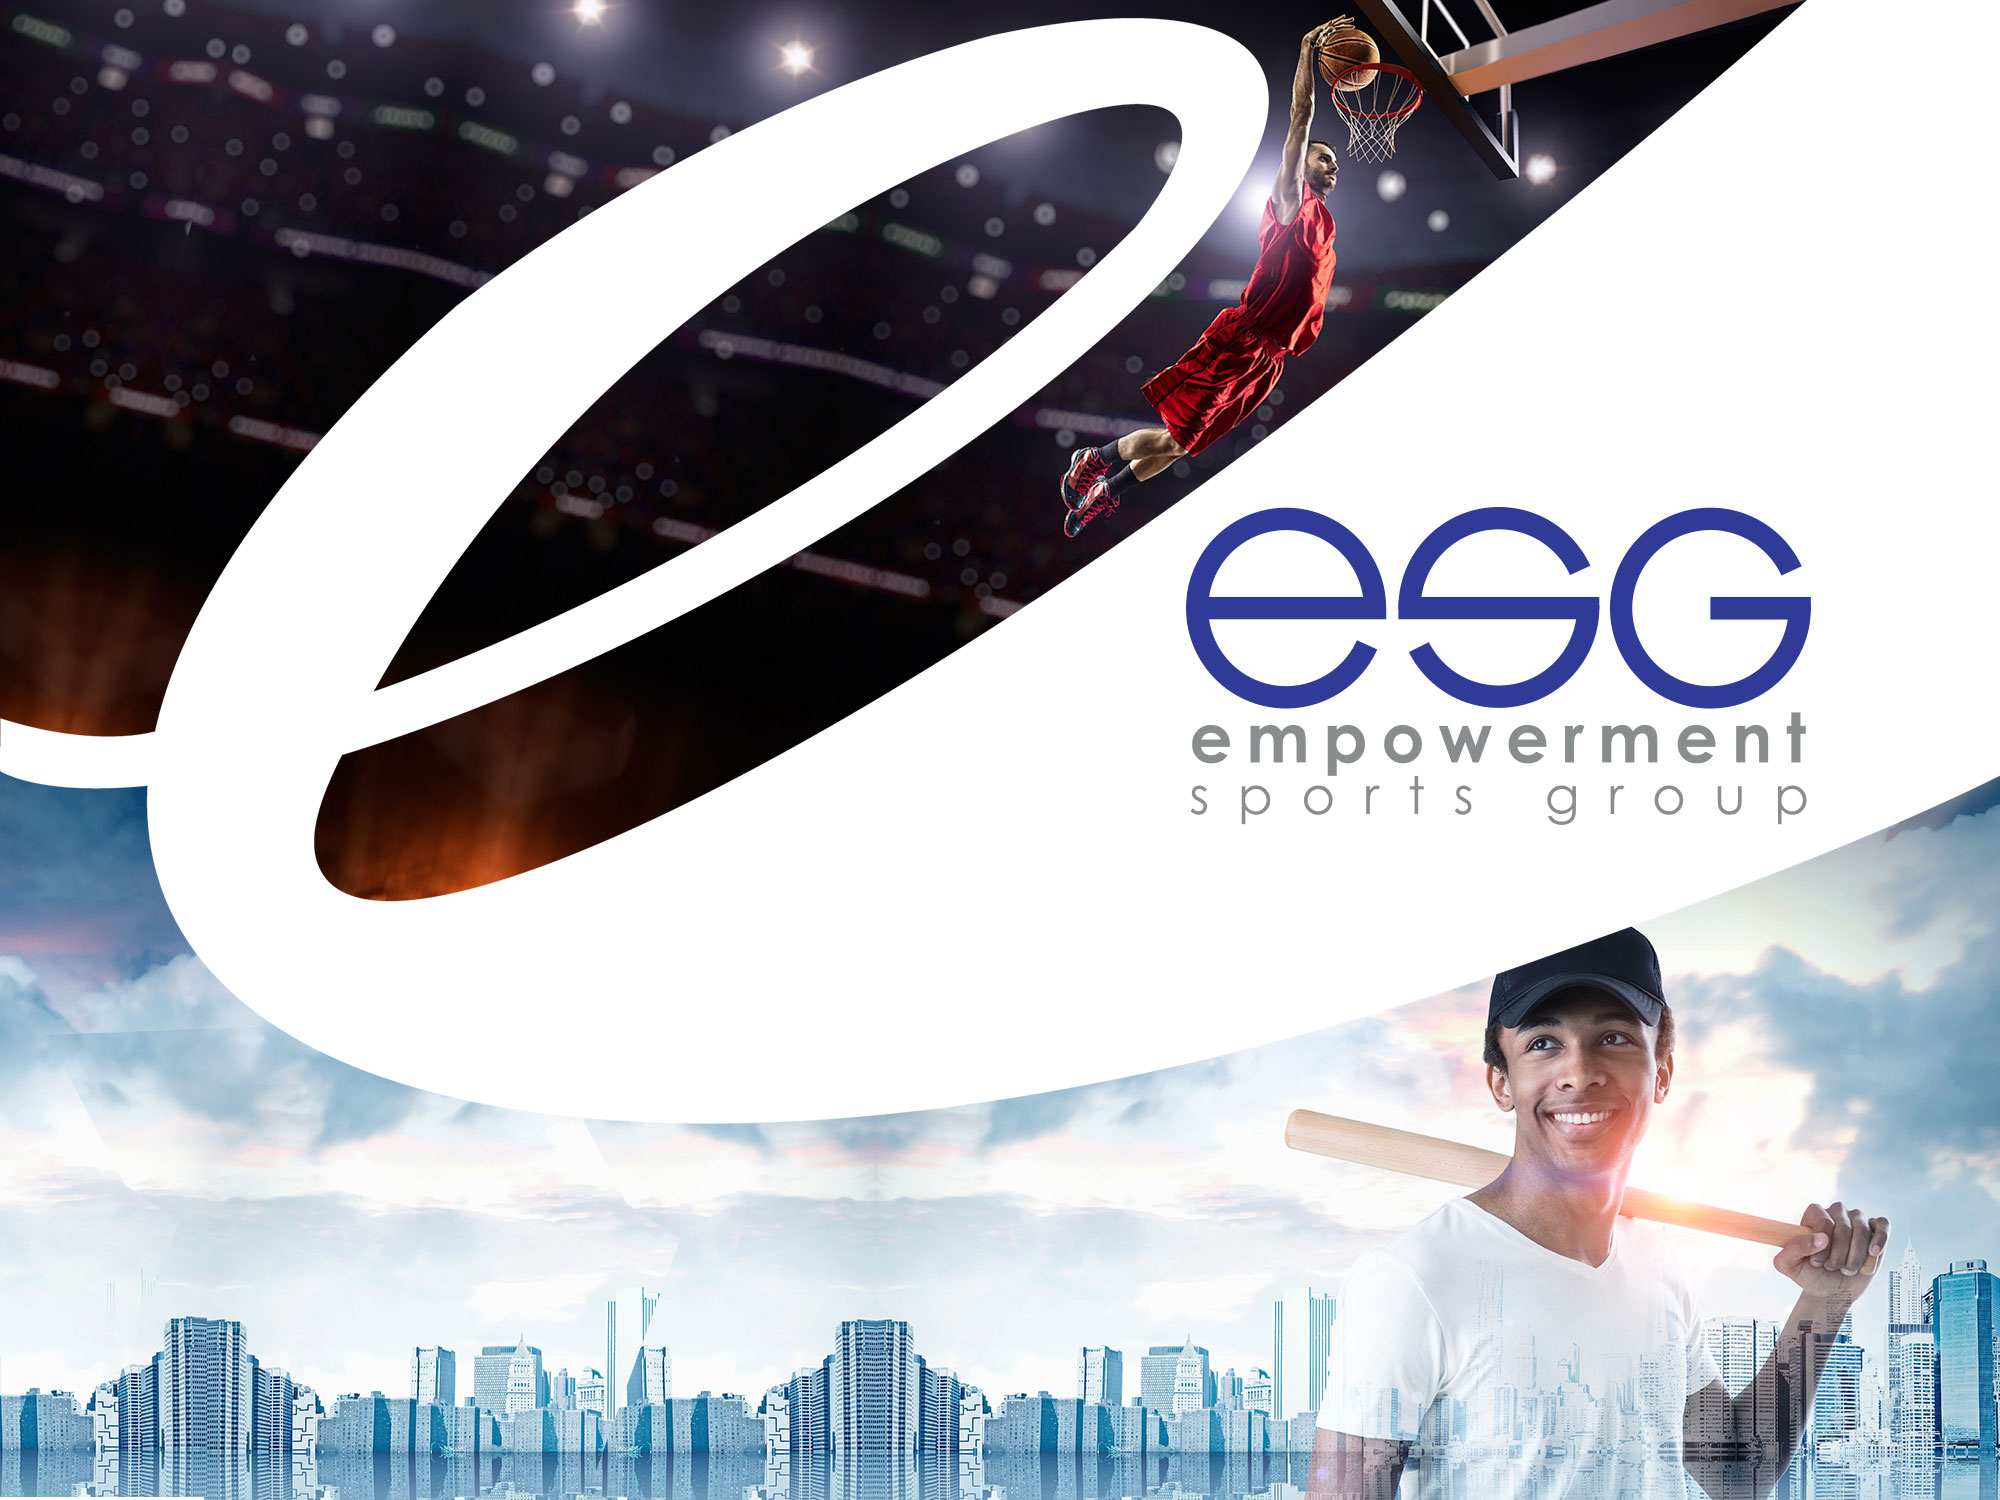 About Empowerment Sports Group - Player Development for Student Athletes